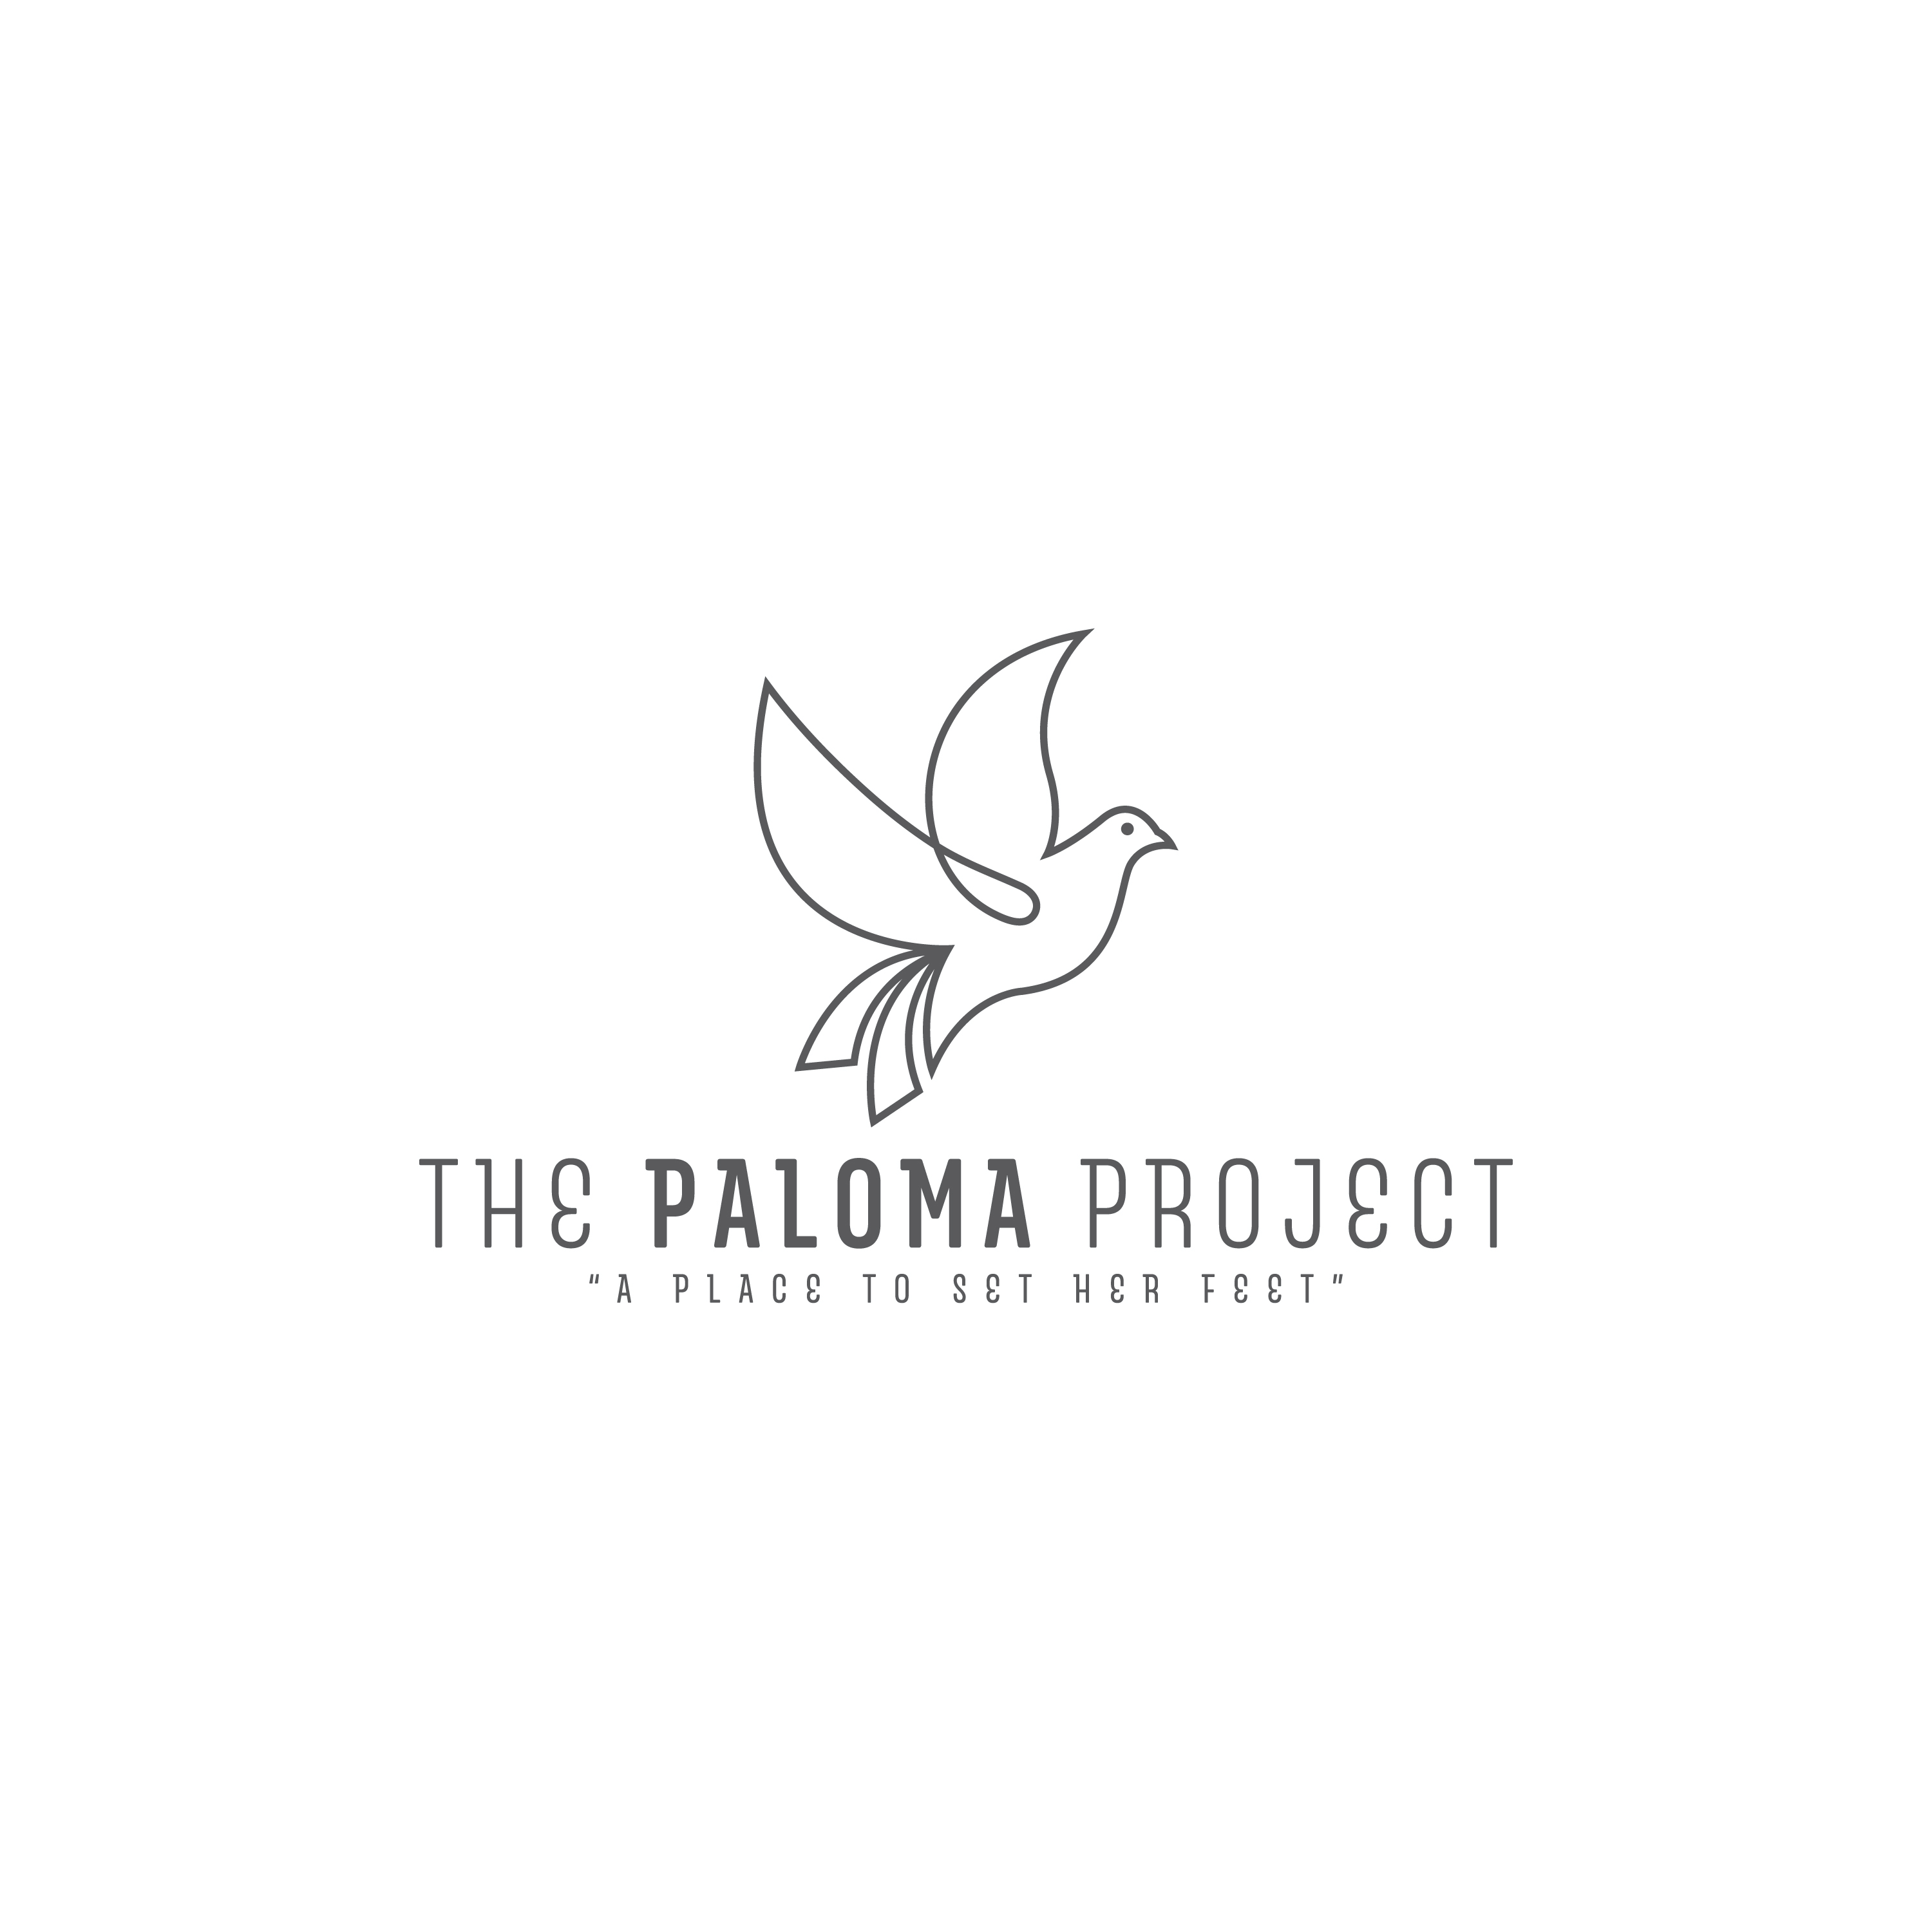 Give Now to the Paloma Project